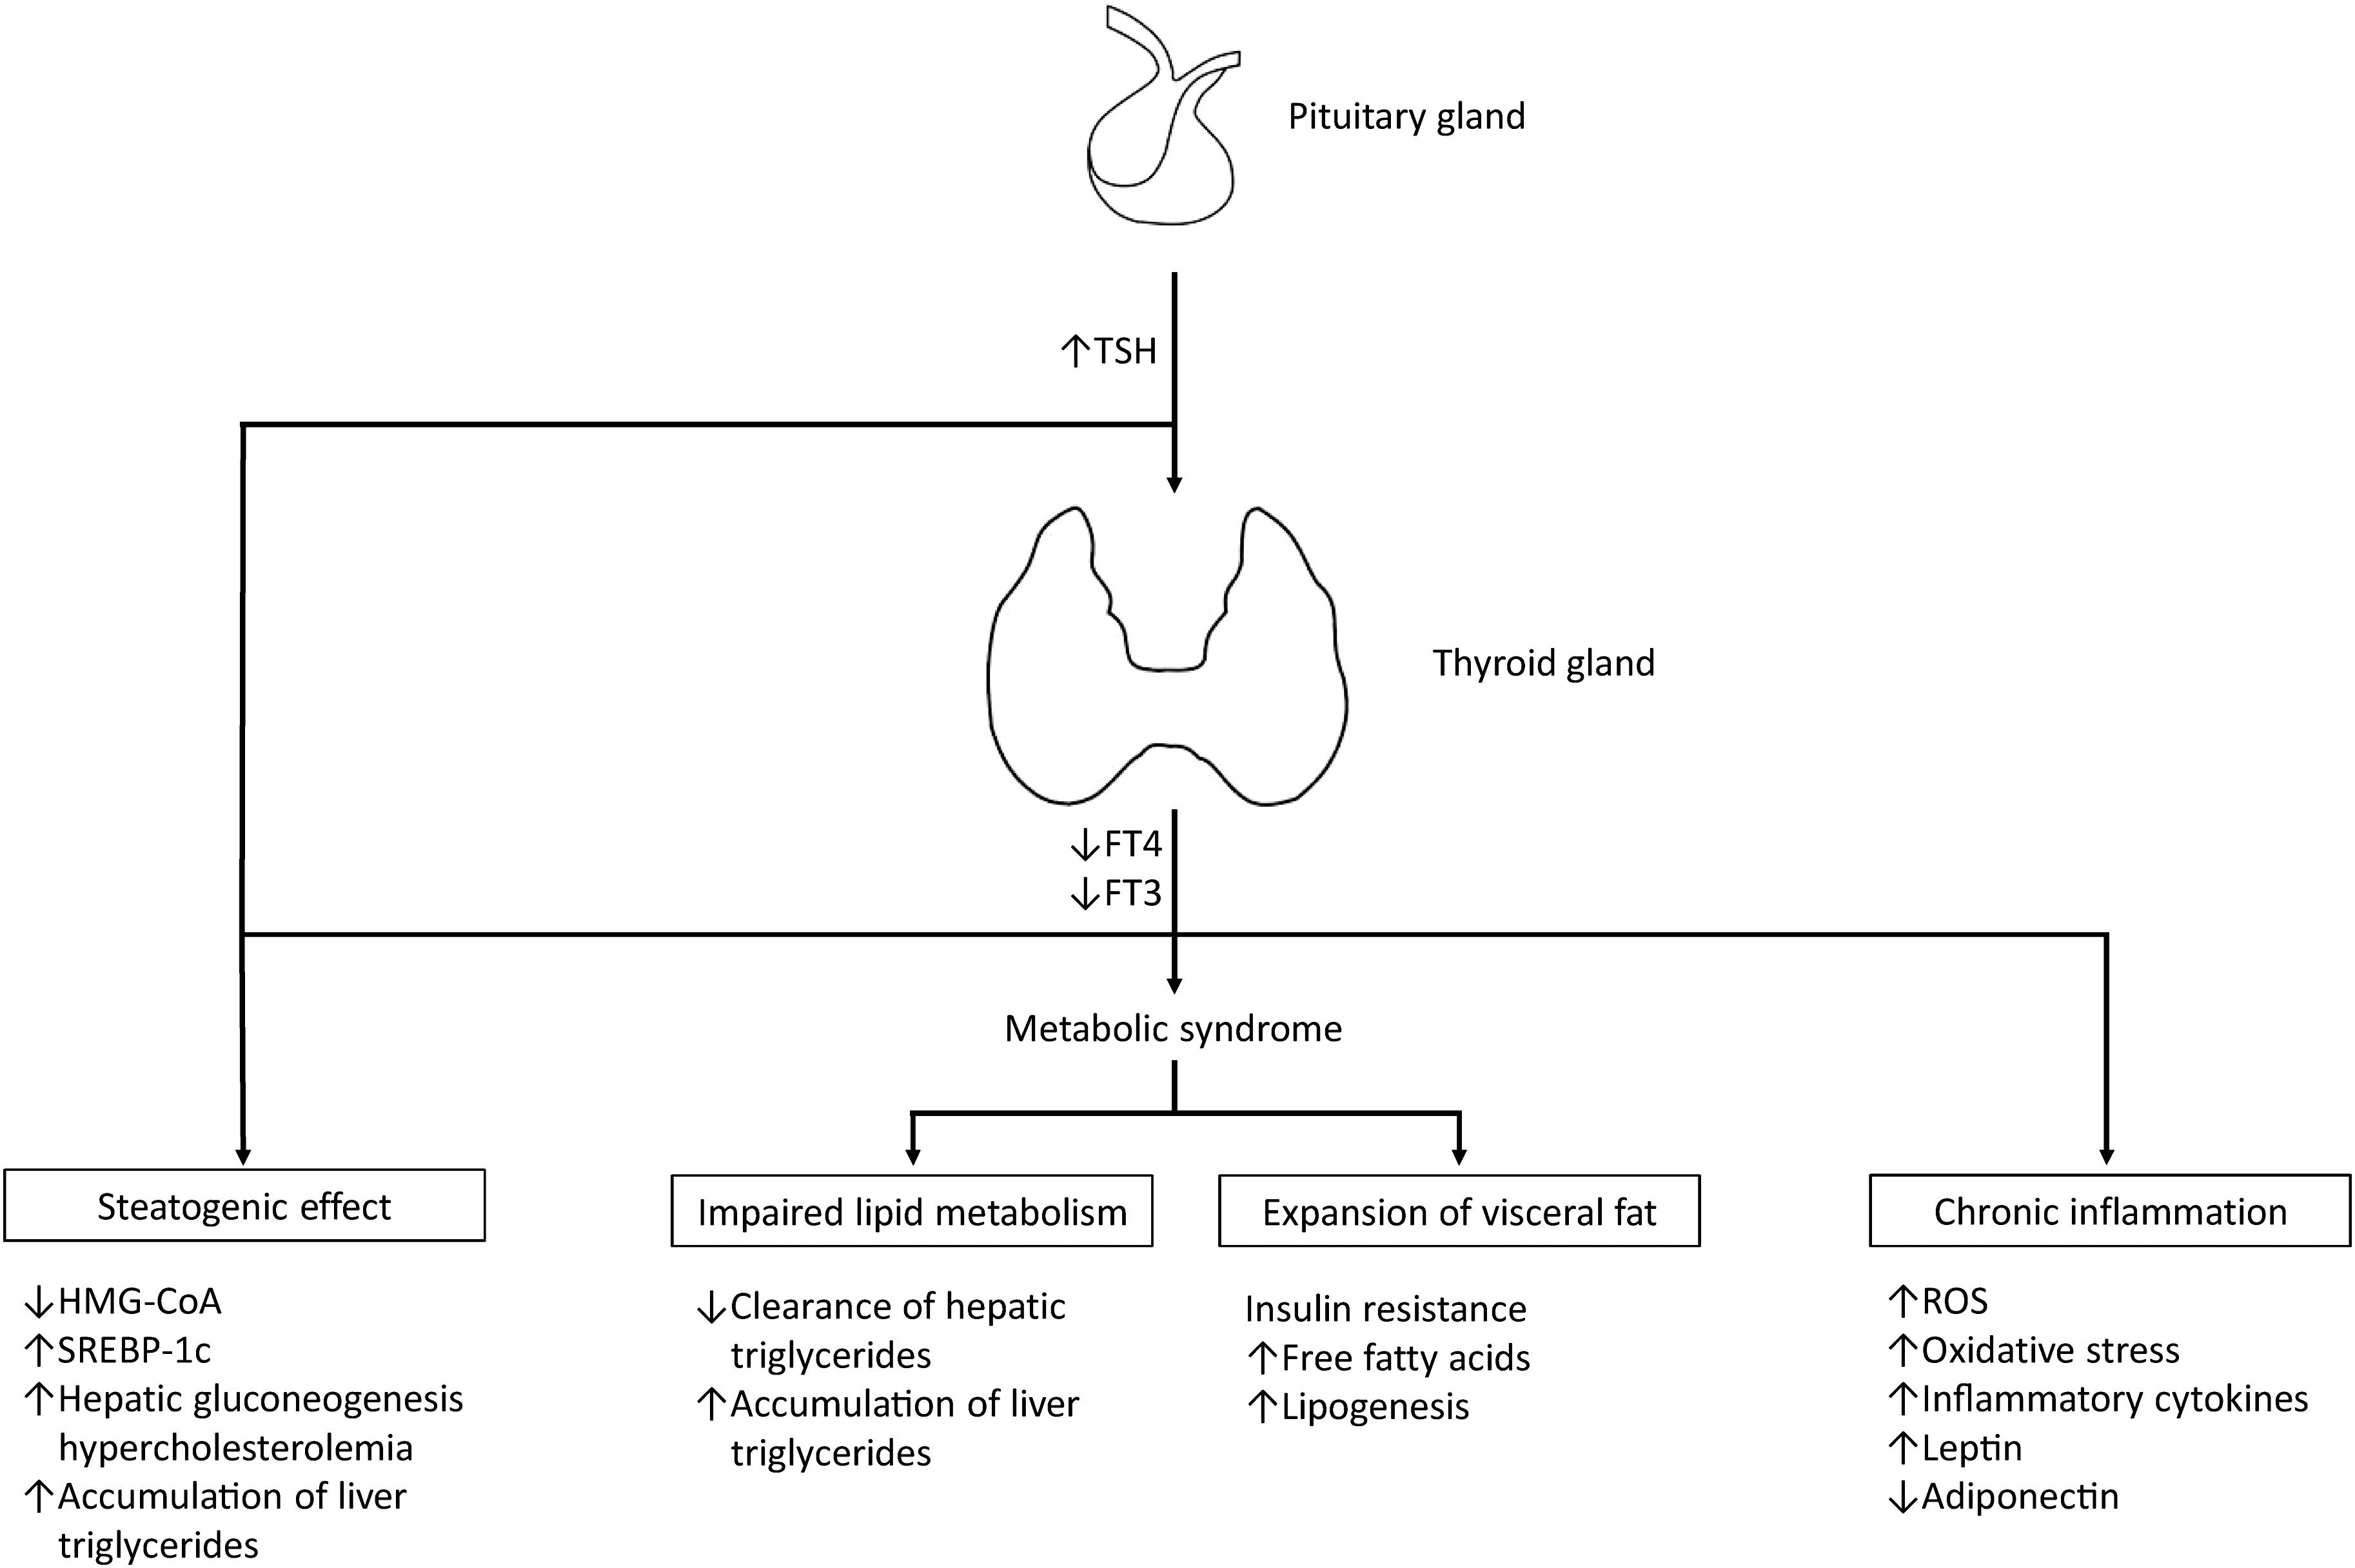 <bold>Possible pathophysiological mechanisms leading to NAFLD in hypothyroidism.</bold> ↑ indicates up-regulation or increased concentrations, ↓ indicates down-regulation.